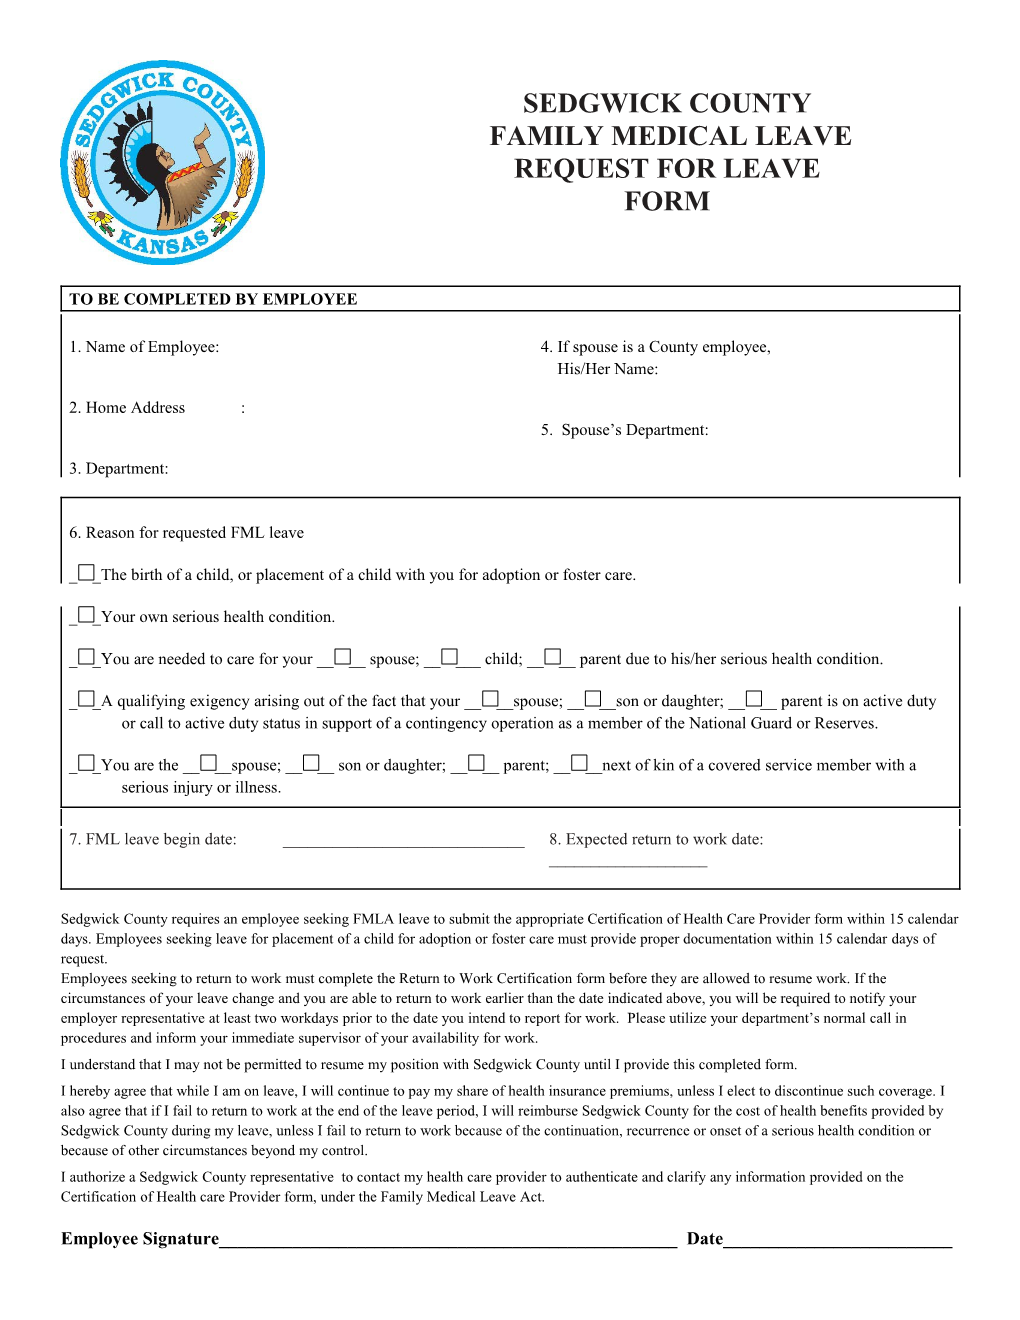 Family Medical Leave Request for Leave Form